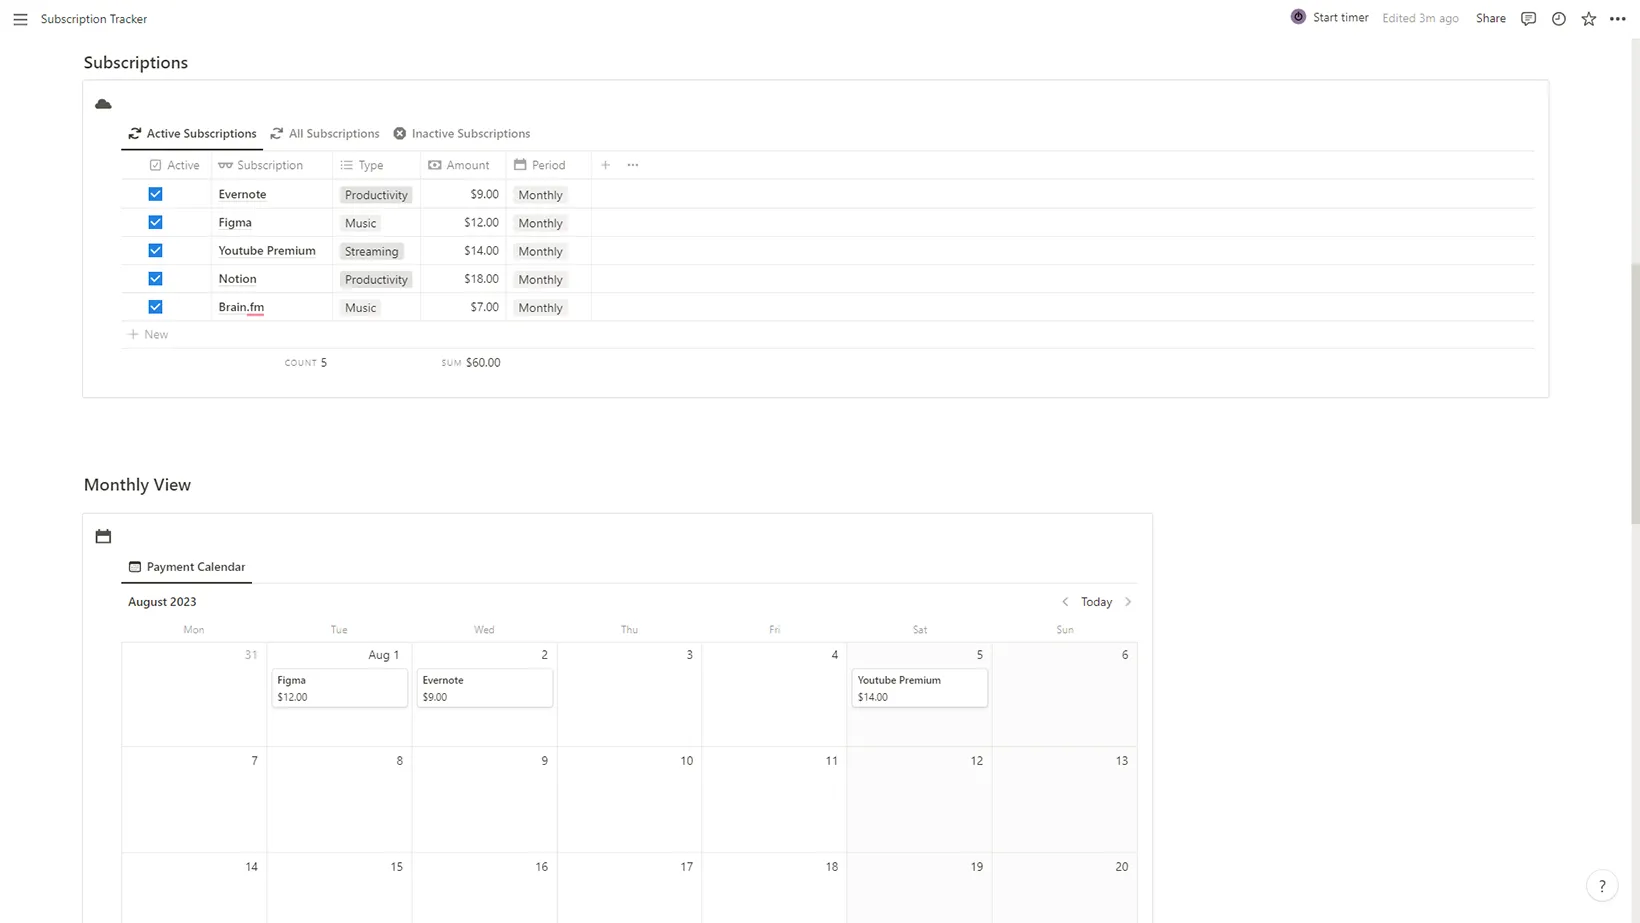 Subscription Tracker Notion Template